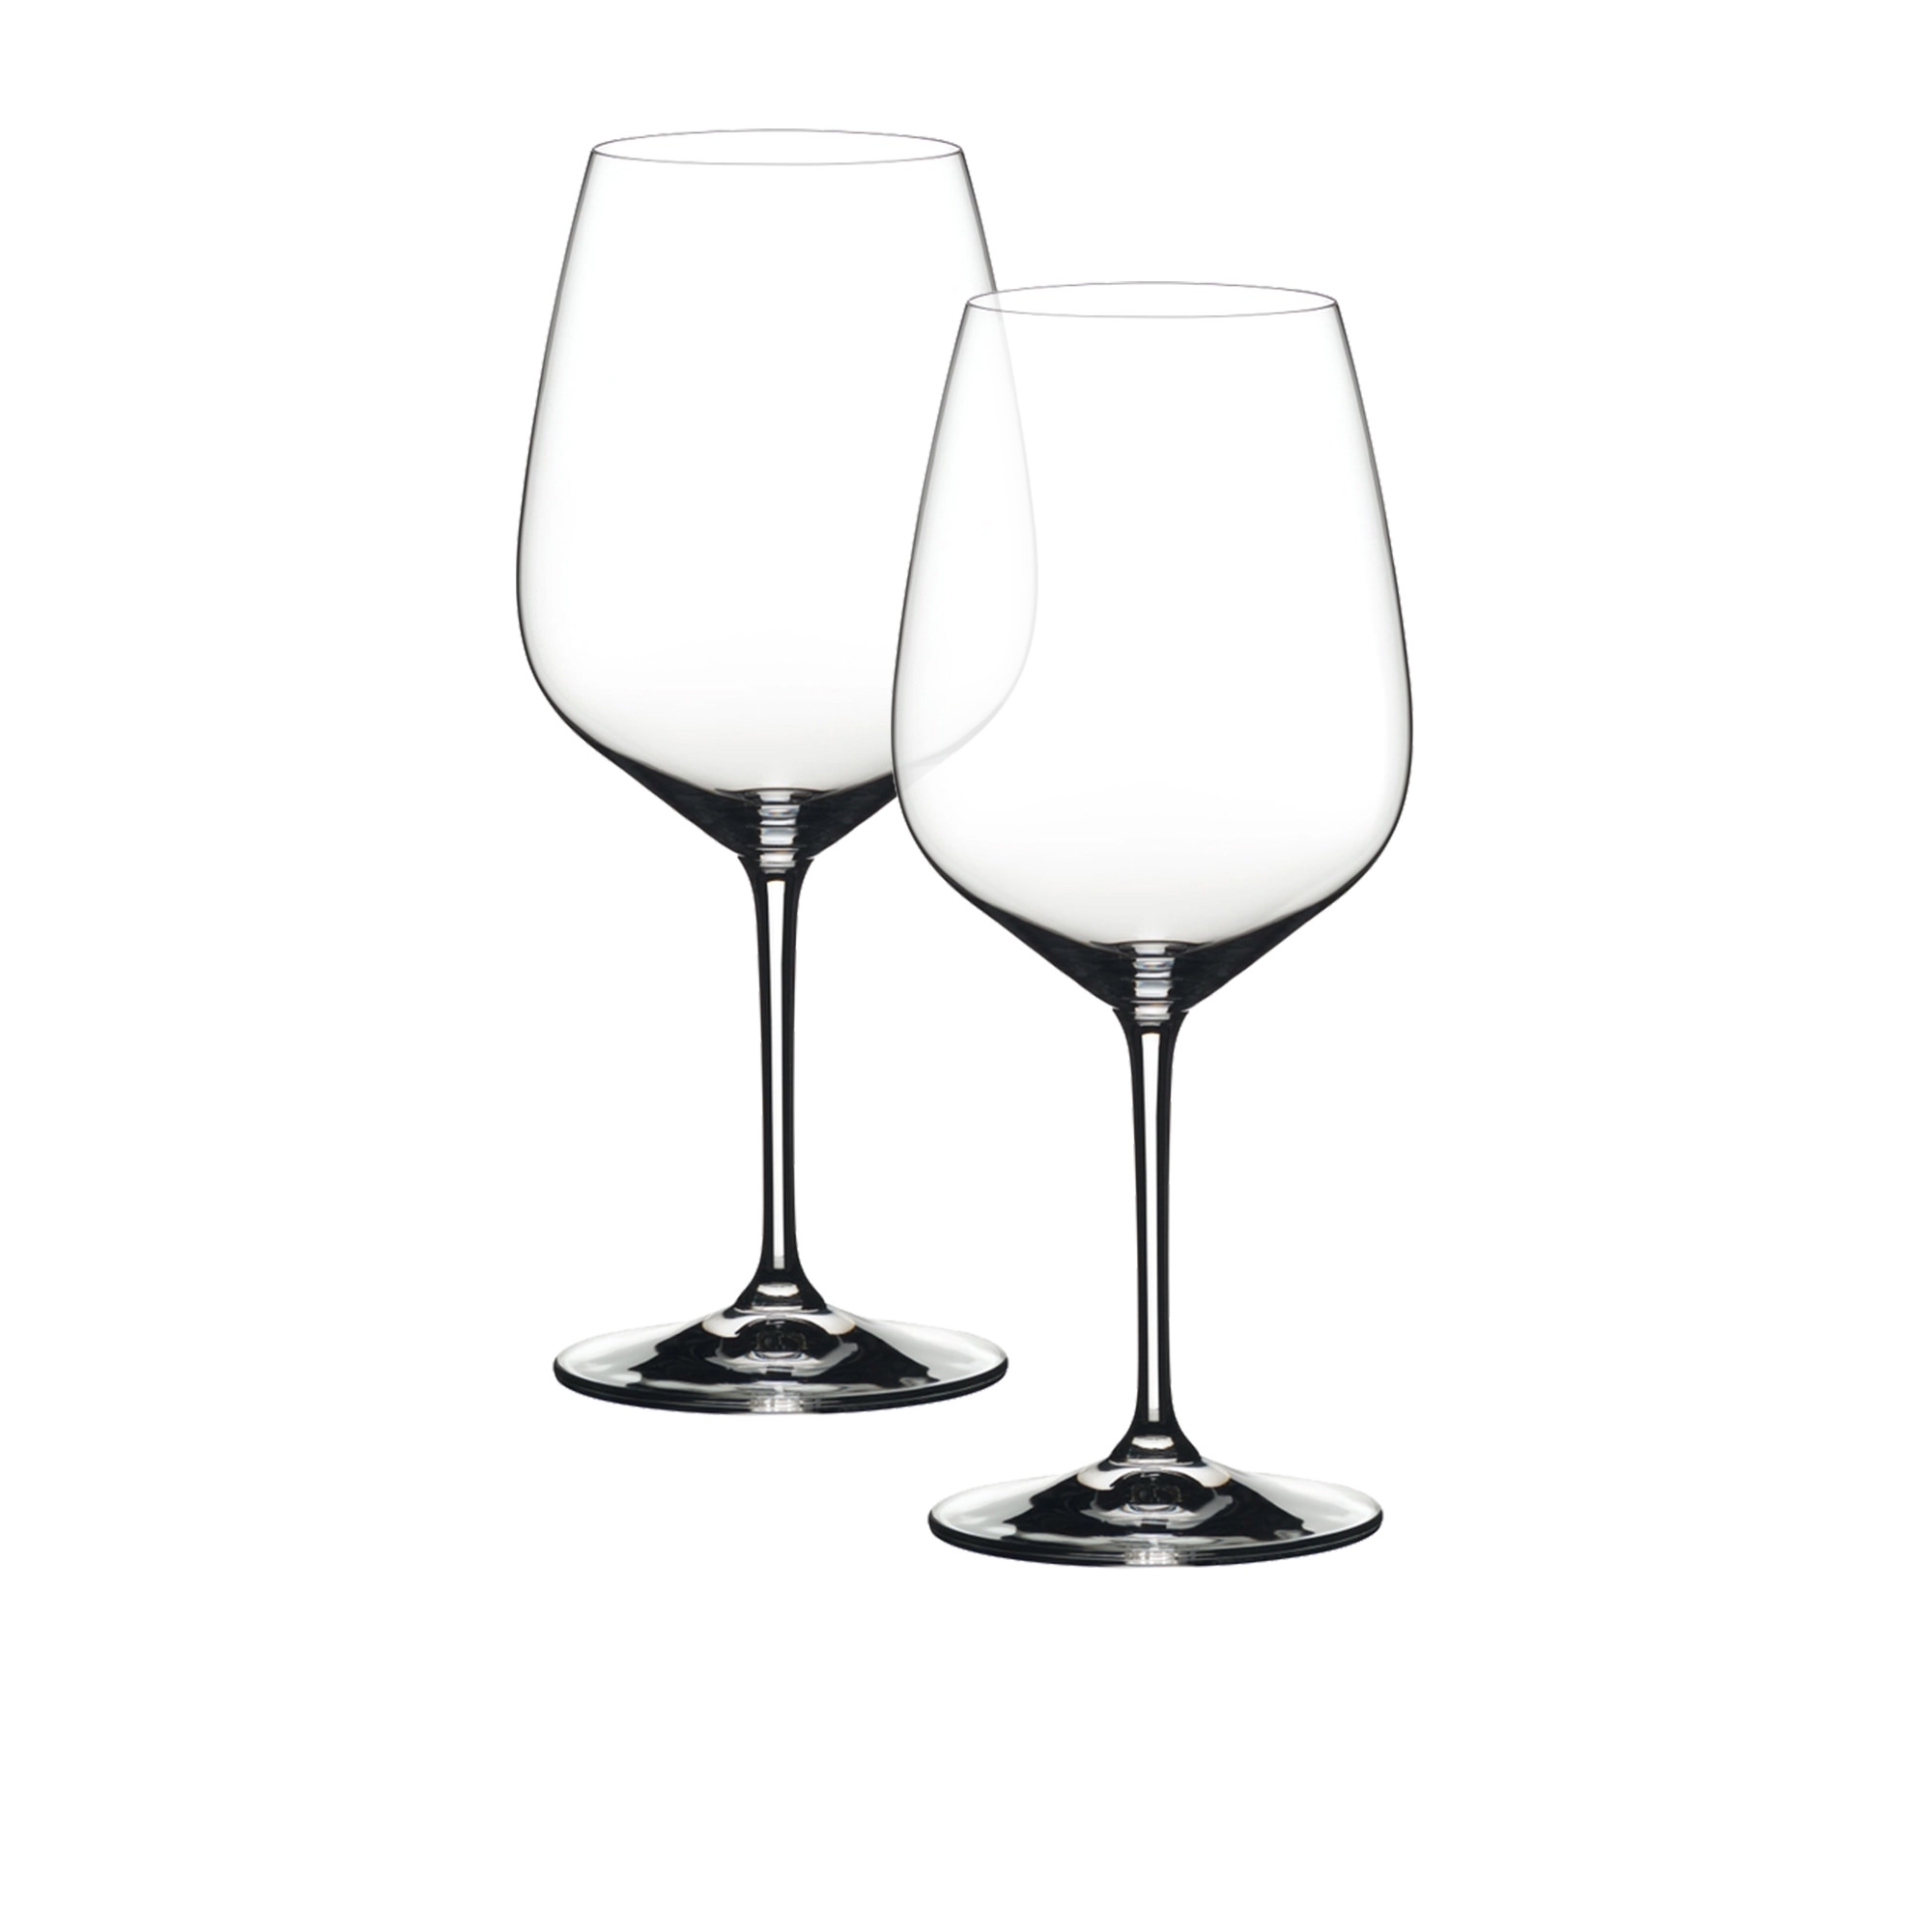 Riedel Extreme Cabernet Glass 800ml Set of 2 Image 2